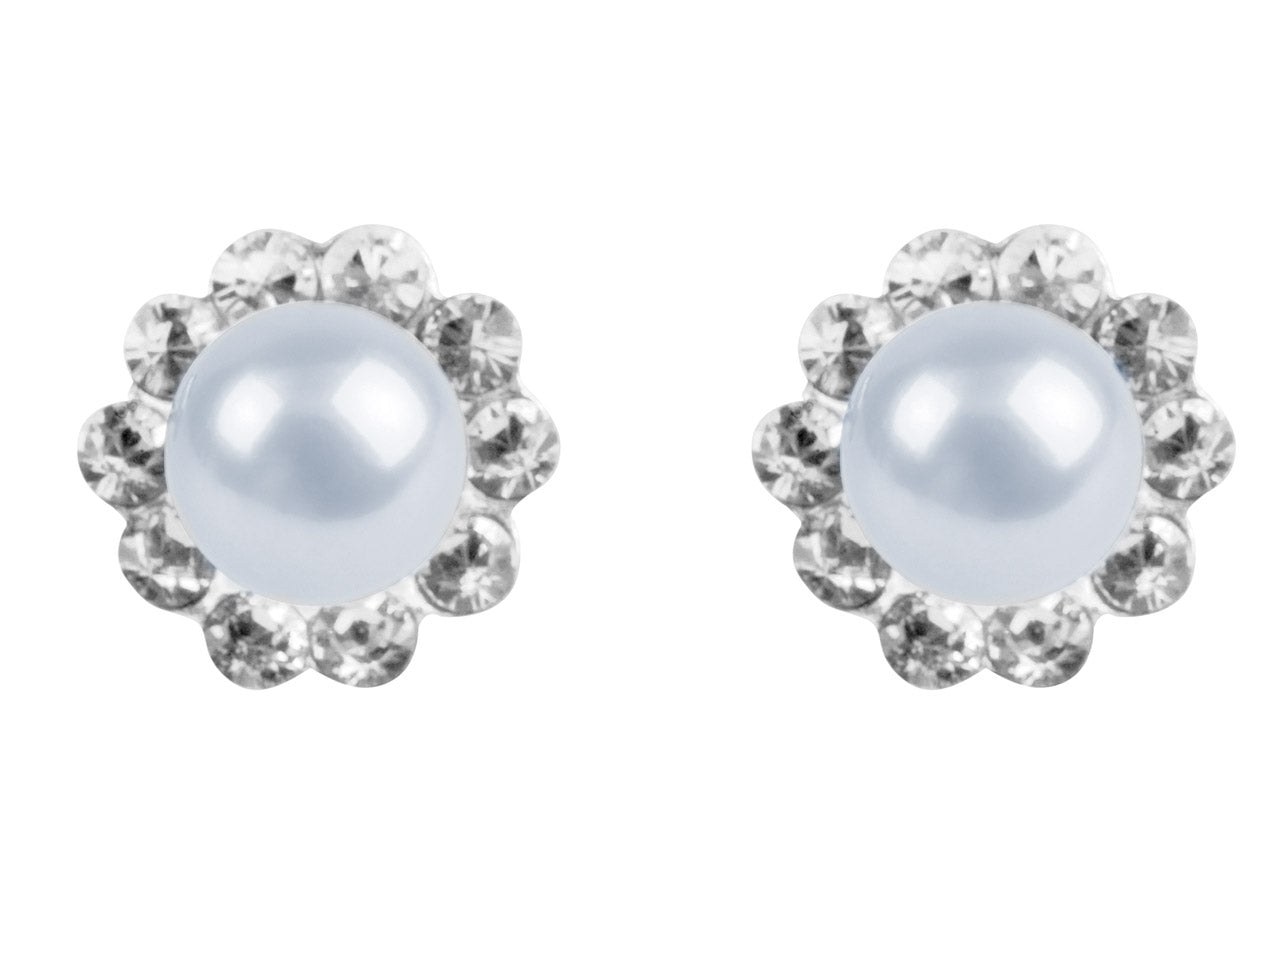 Freshwater Pearl Stud Earrings with Sterling Silver Crystal Surround